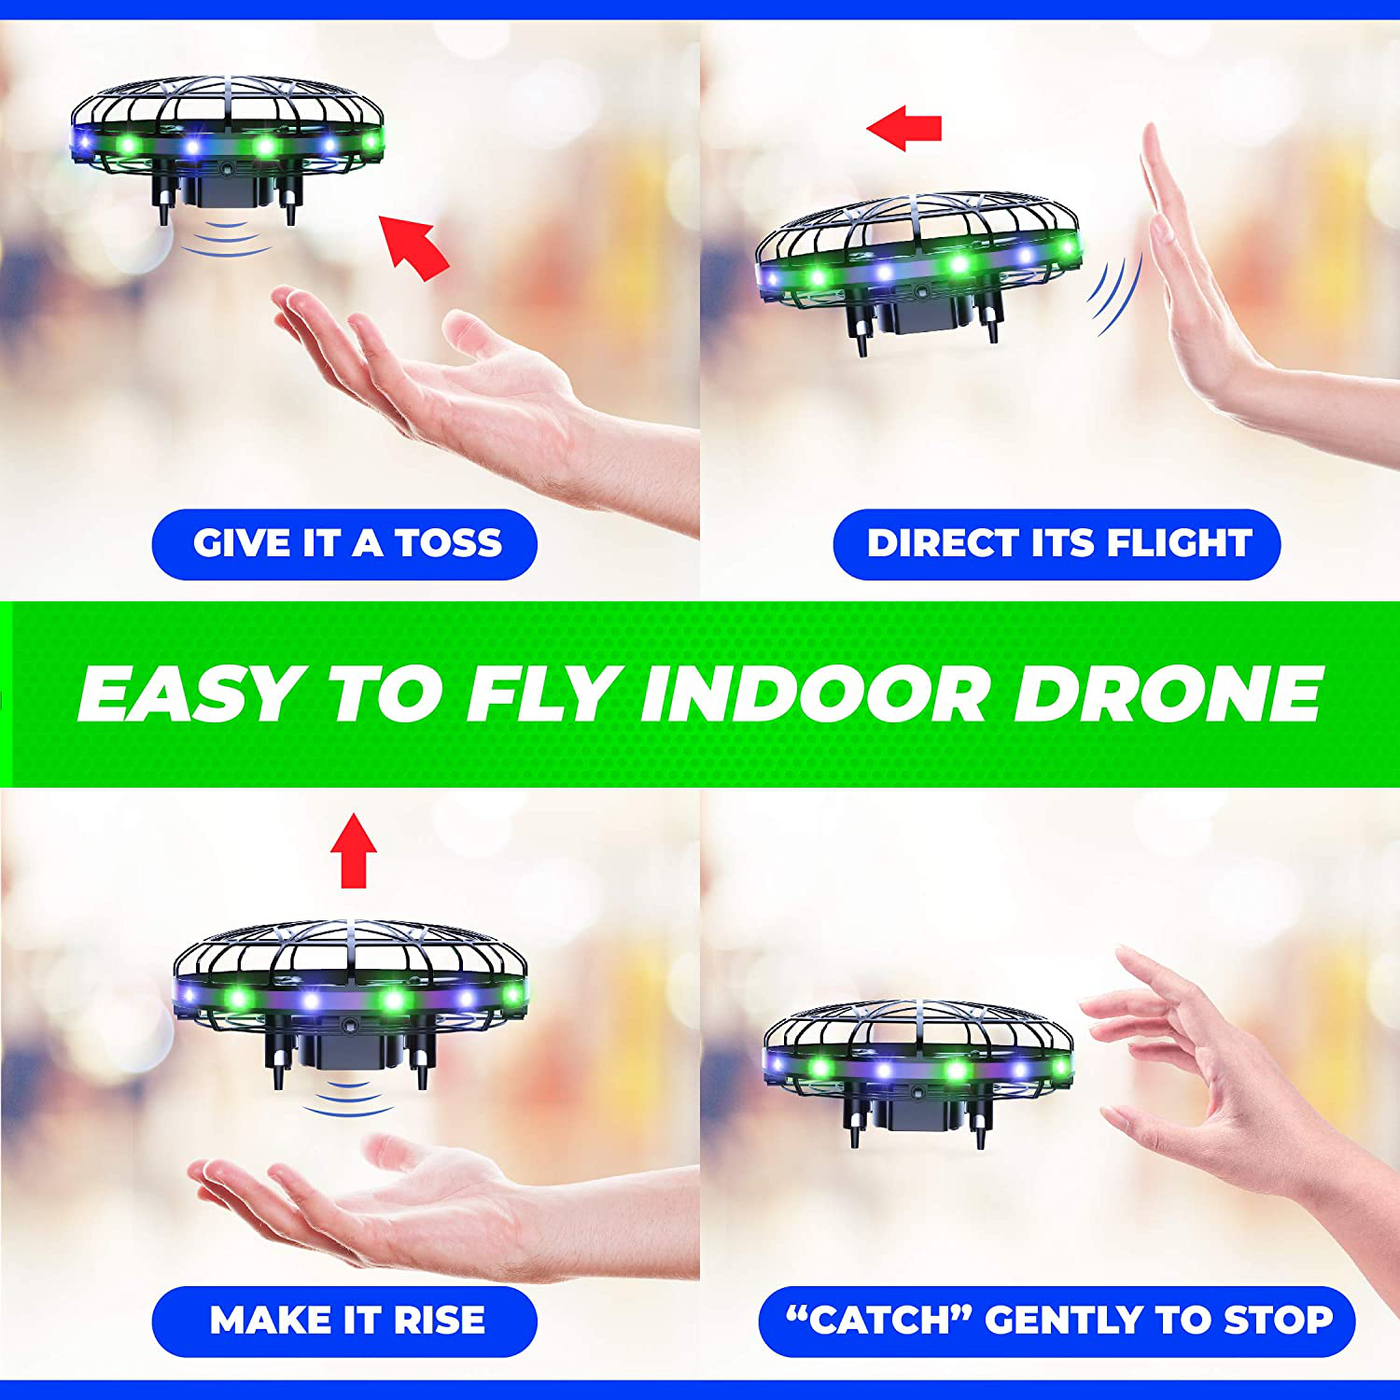 Force1 Scoot LED Hand Operated Drone for Kids or Adults - Hands Free Motion Sensor Mini Drone, Easy Indoor Small UFO Toy Flying Ball Drone Toy for Boys and Girls (Green/Blue)